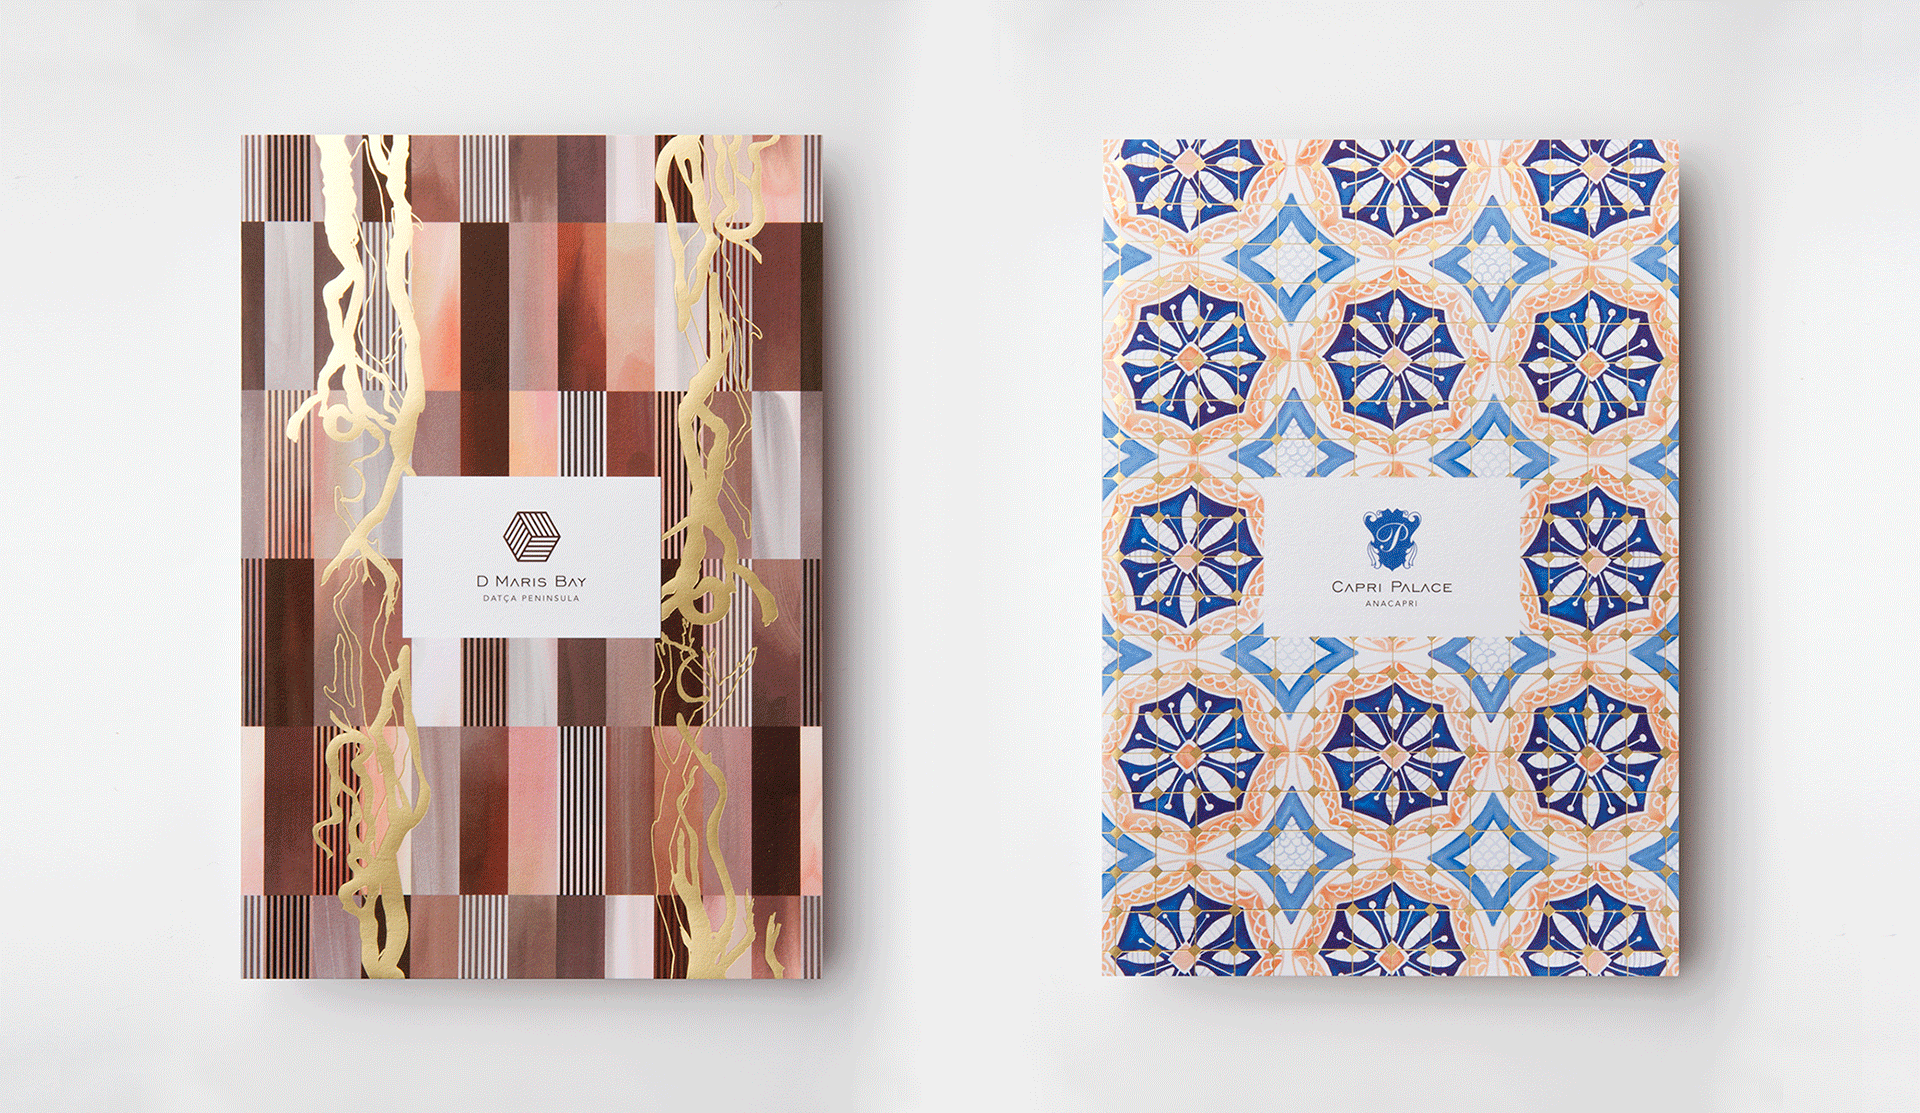 15:03 design, Ksenia Smirnova, Branding and visual identity for Mytha Hotel Anthology, a chain of luxury hotels in the Mediterranean Sea. Set of brochures, pattern design